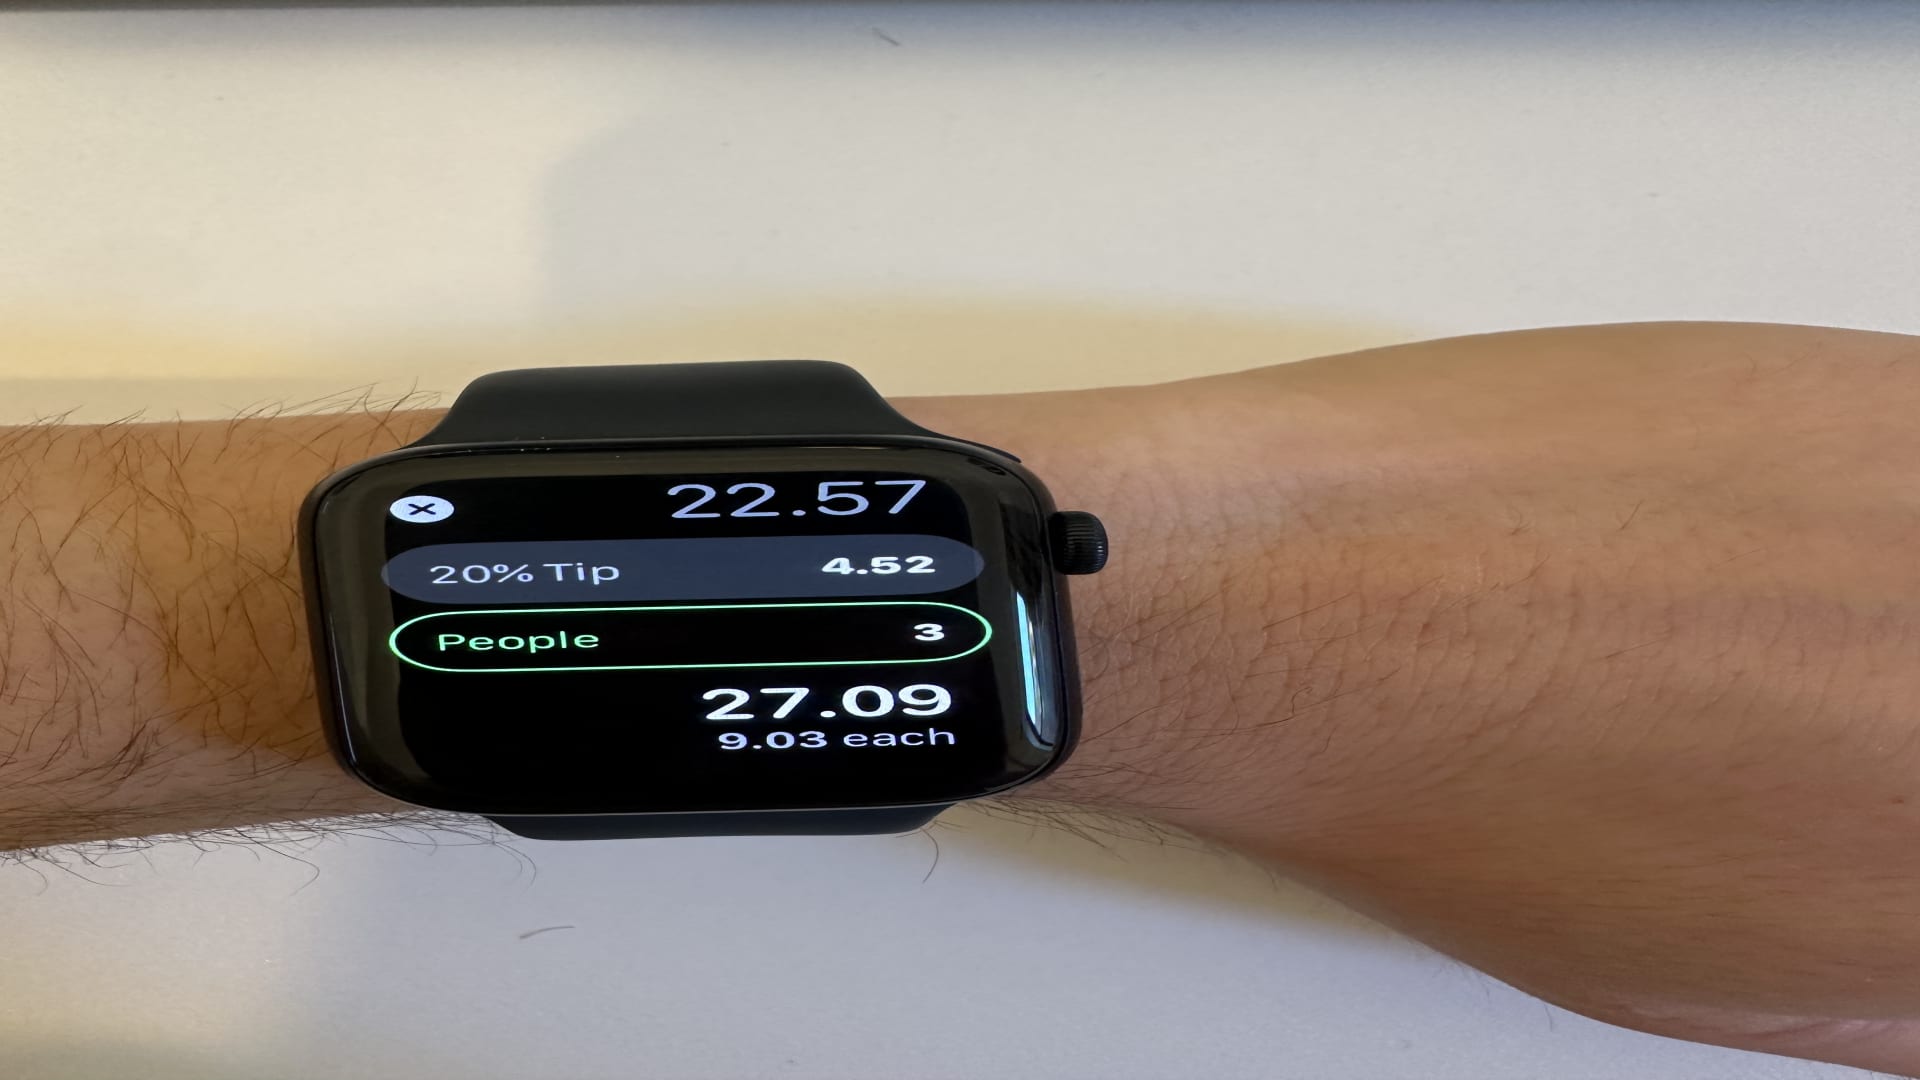 How to use your Apple Watch to calculate the tip and split a check at a restaurant